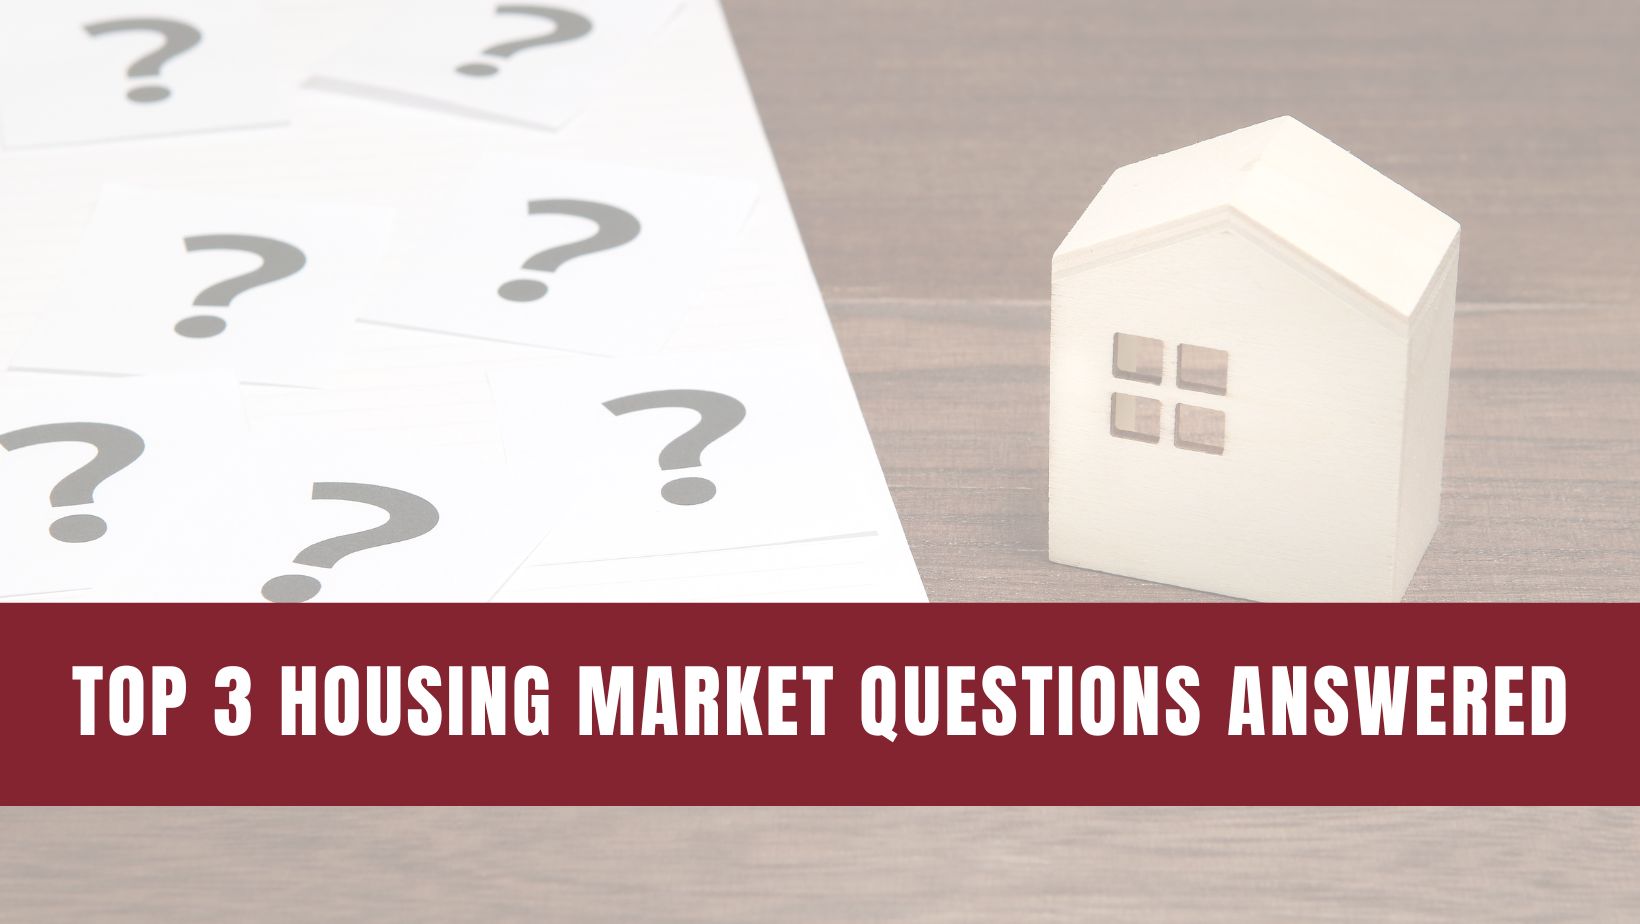 Are The Top 3 Housing Market Questions on Your Mind?